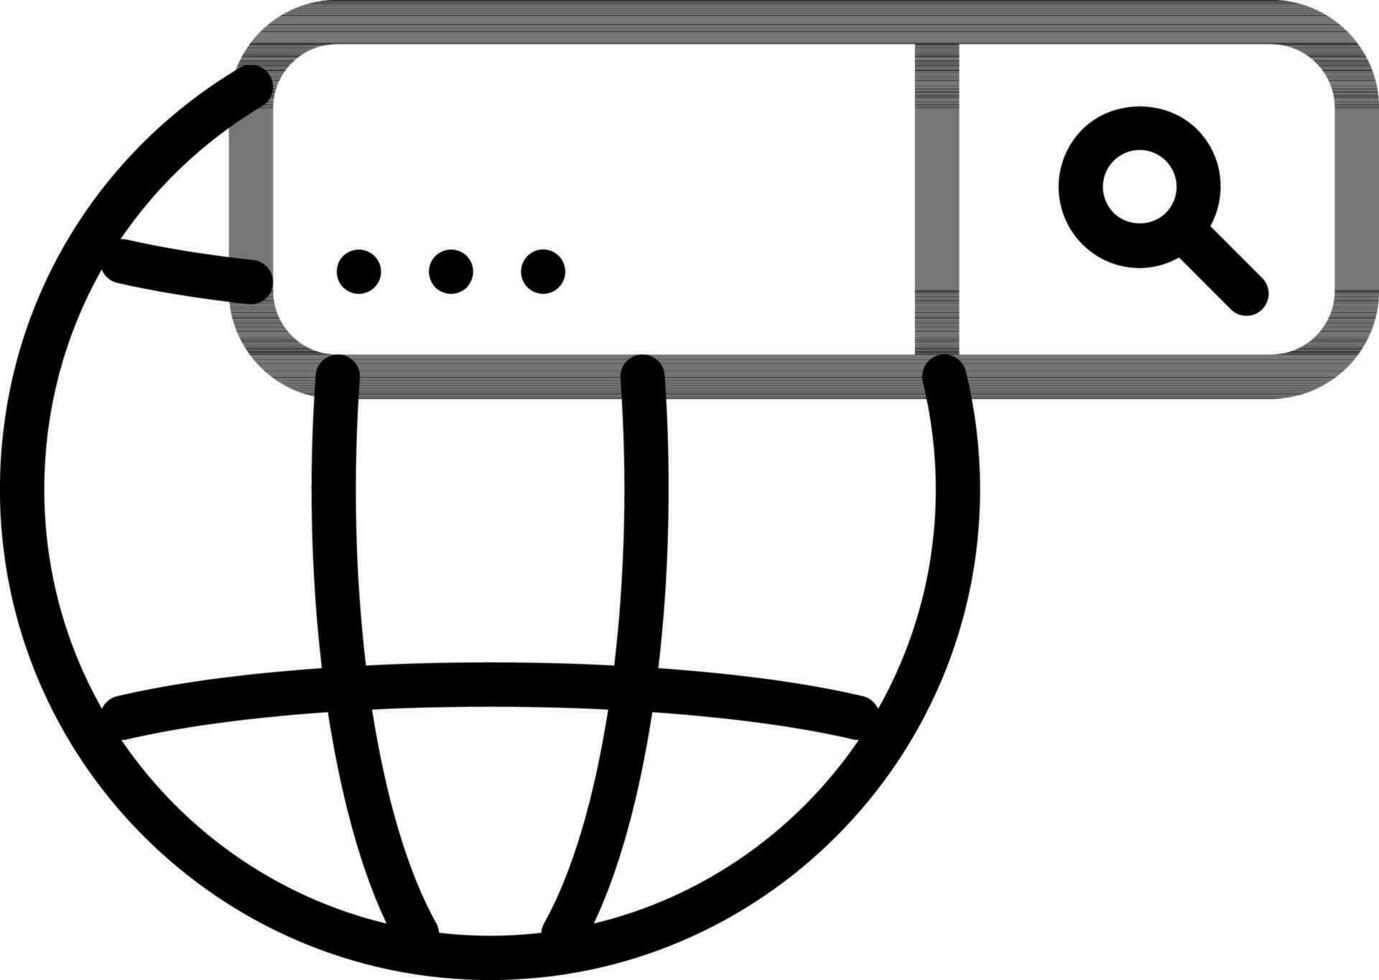 Global Search Or URL Icon In Black Line Art. vector